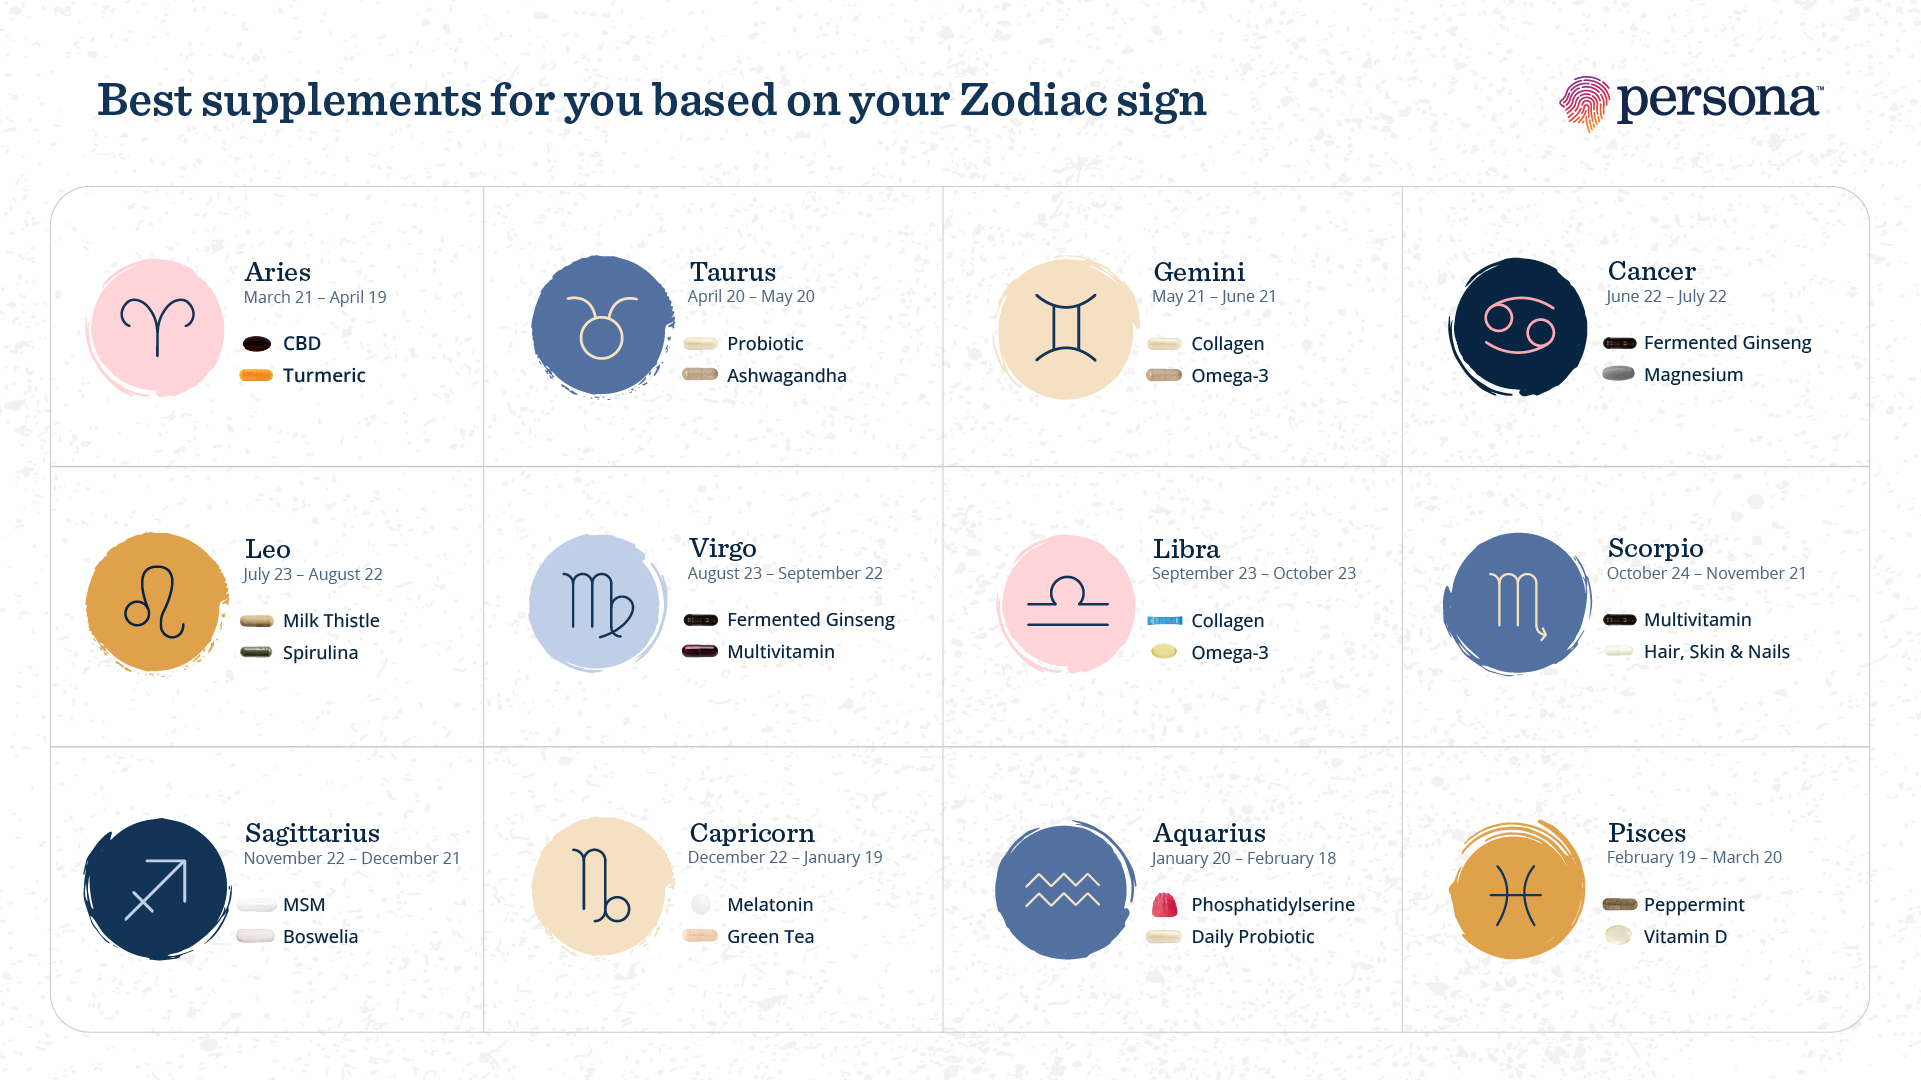 Best supplement for you based on your Zodiac sign - Blog - Persona